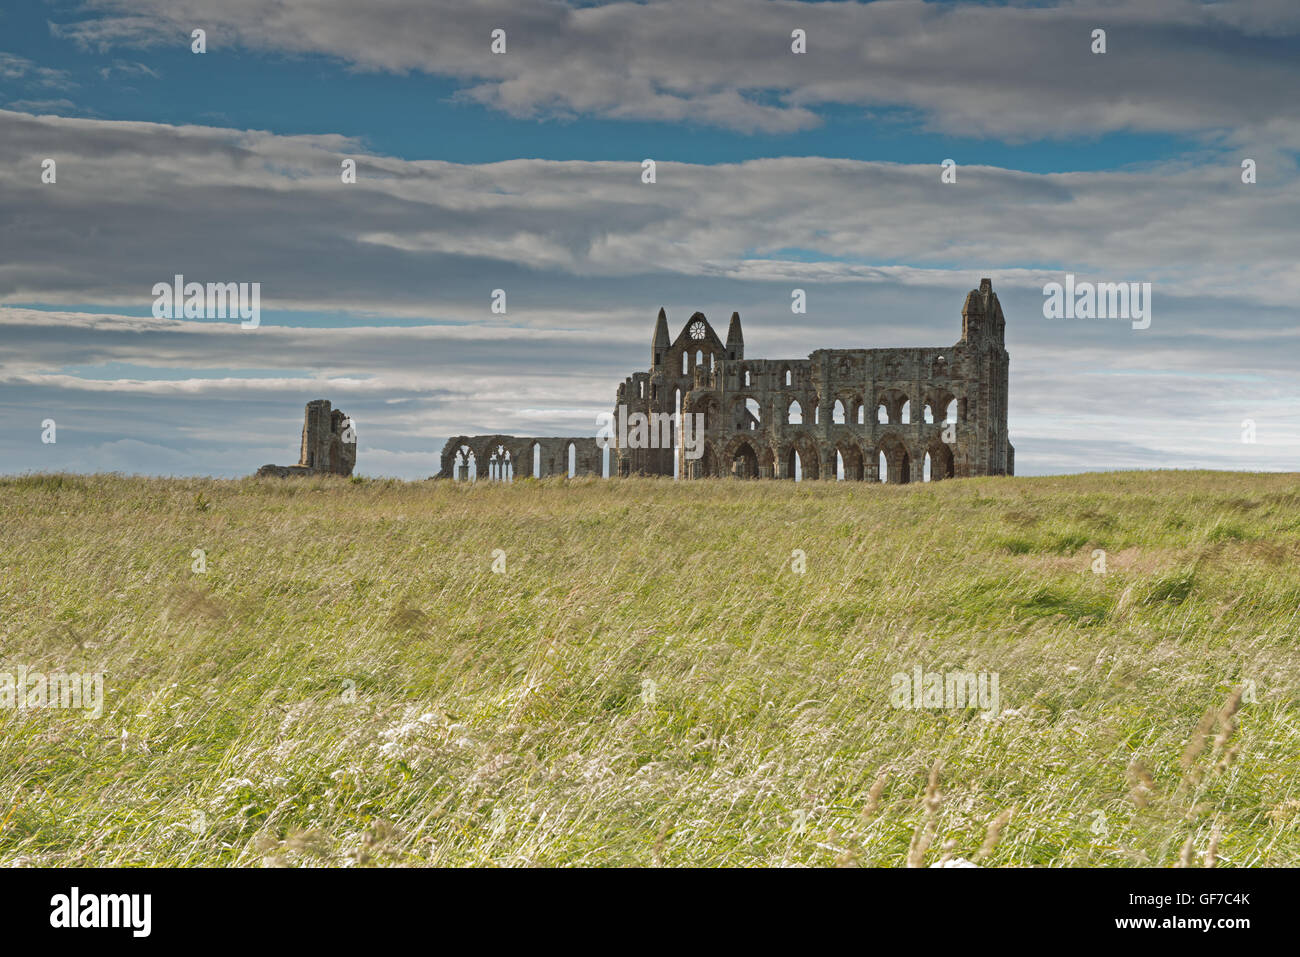 L'Abbaye de Whitby, Whitby, North Yorkshire, England, UK, FR Banque D'Images